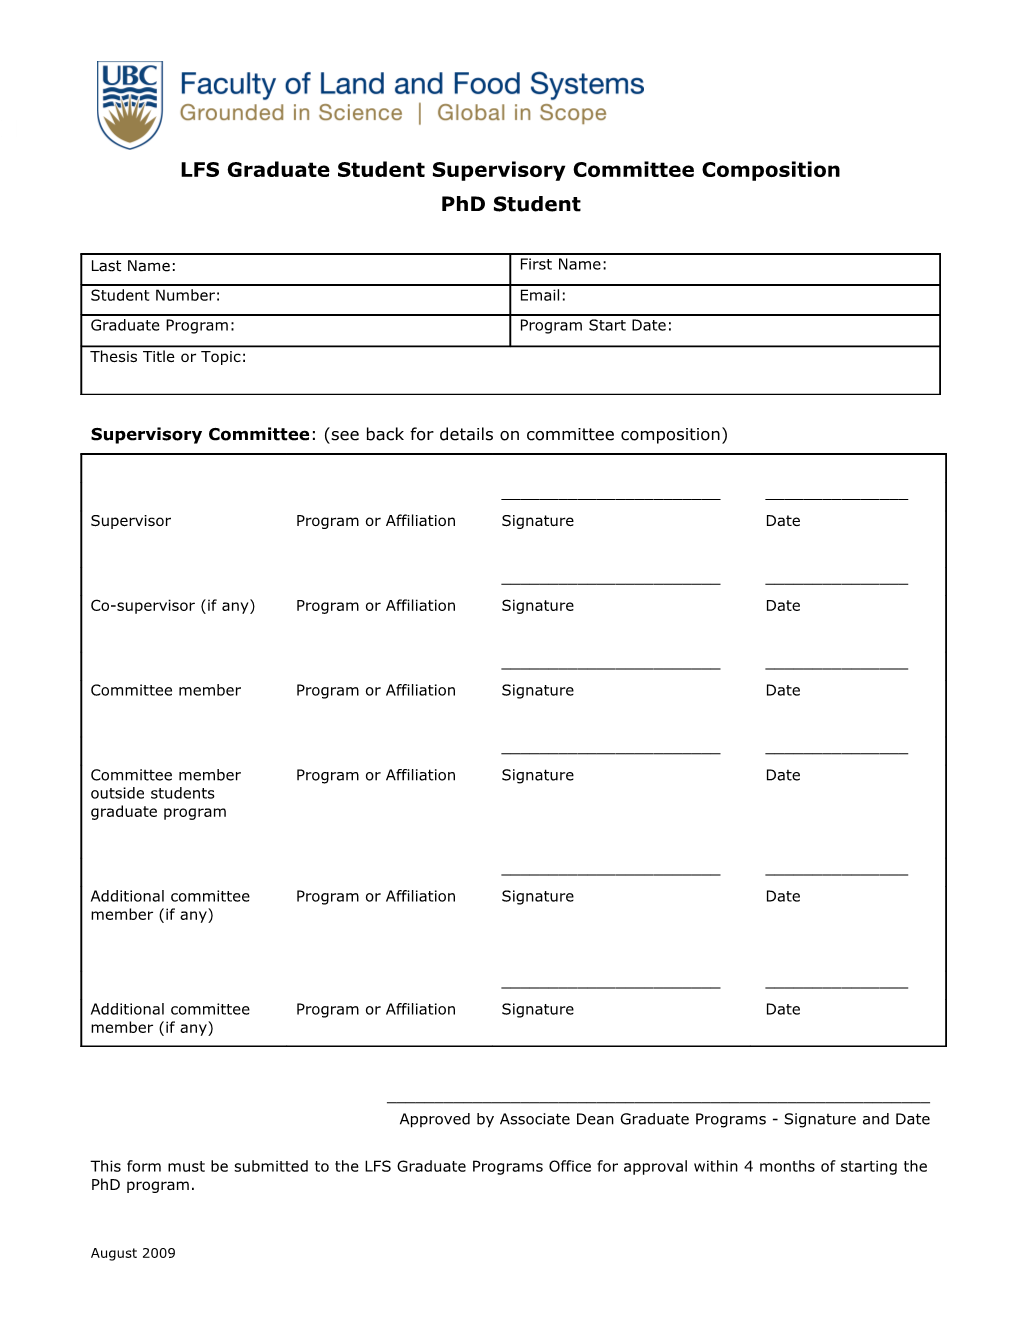 LFS Graduate Student Supervisory Committee Composition